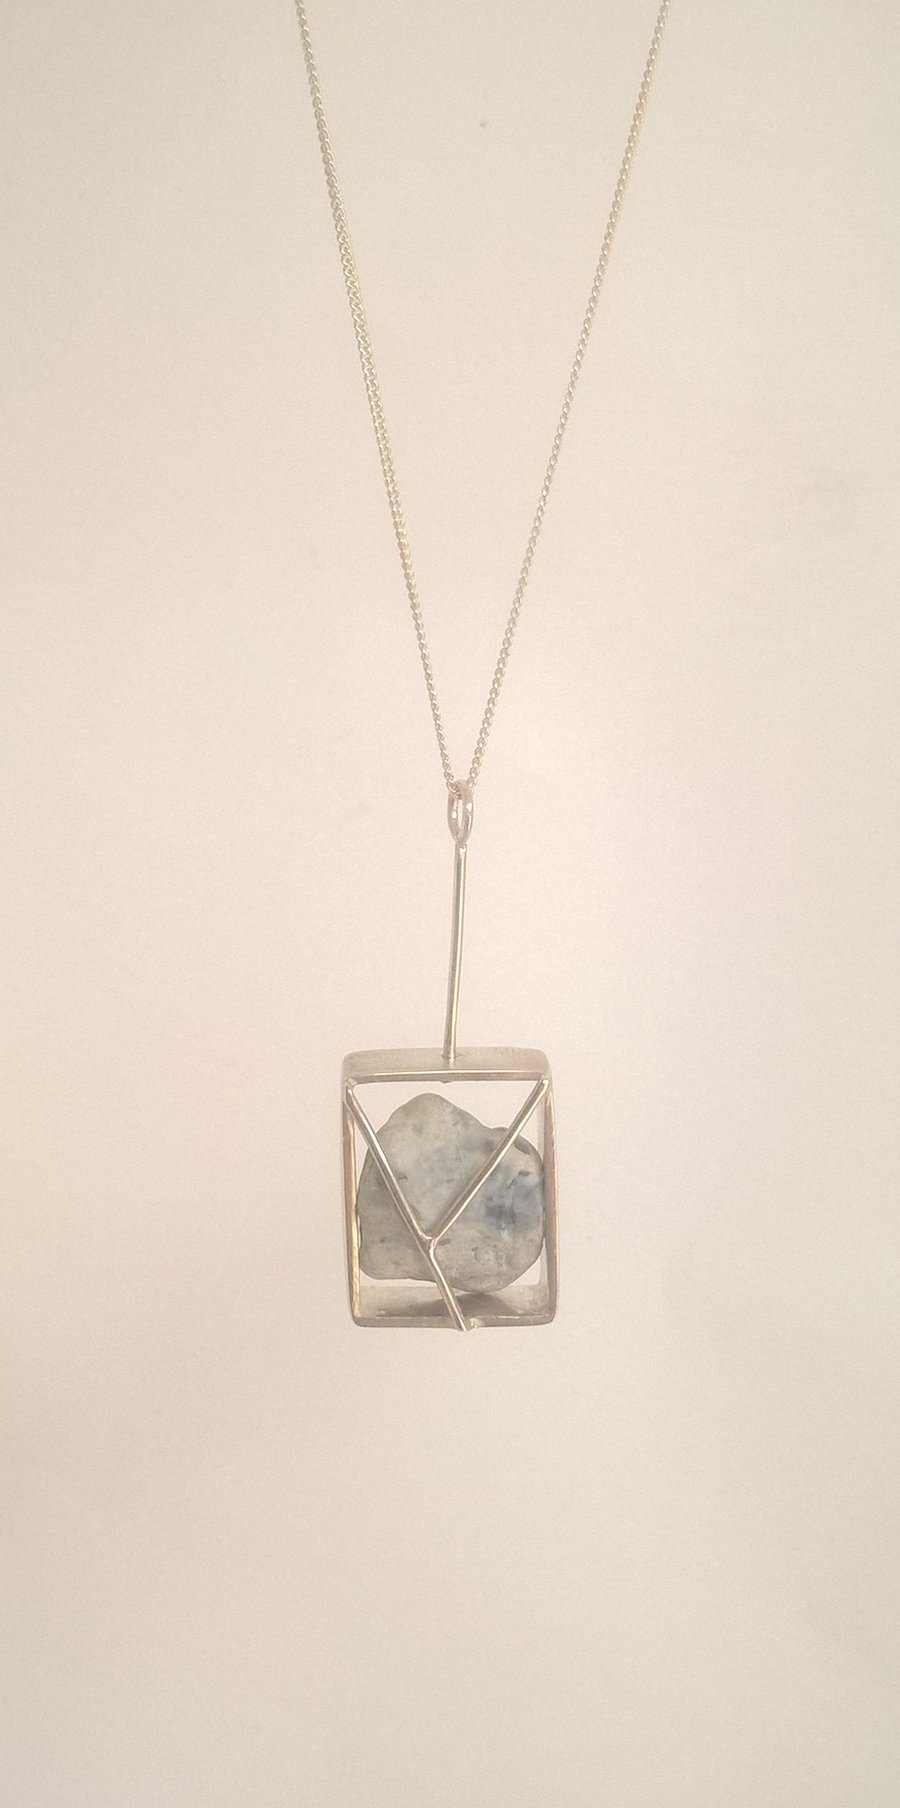 Stone in a Box Necklace